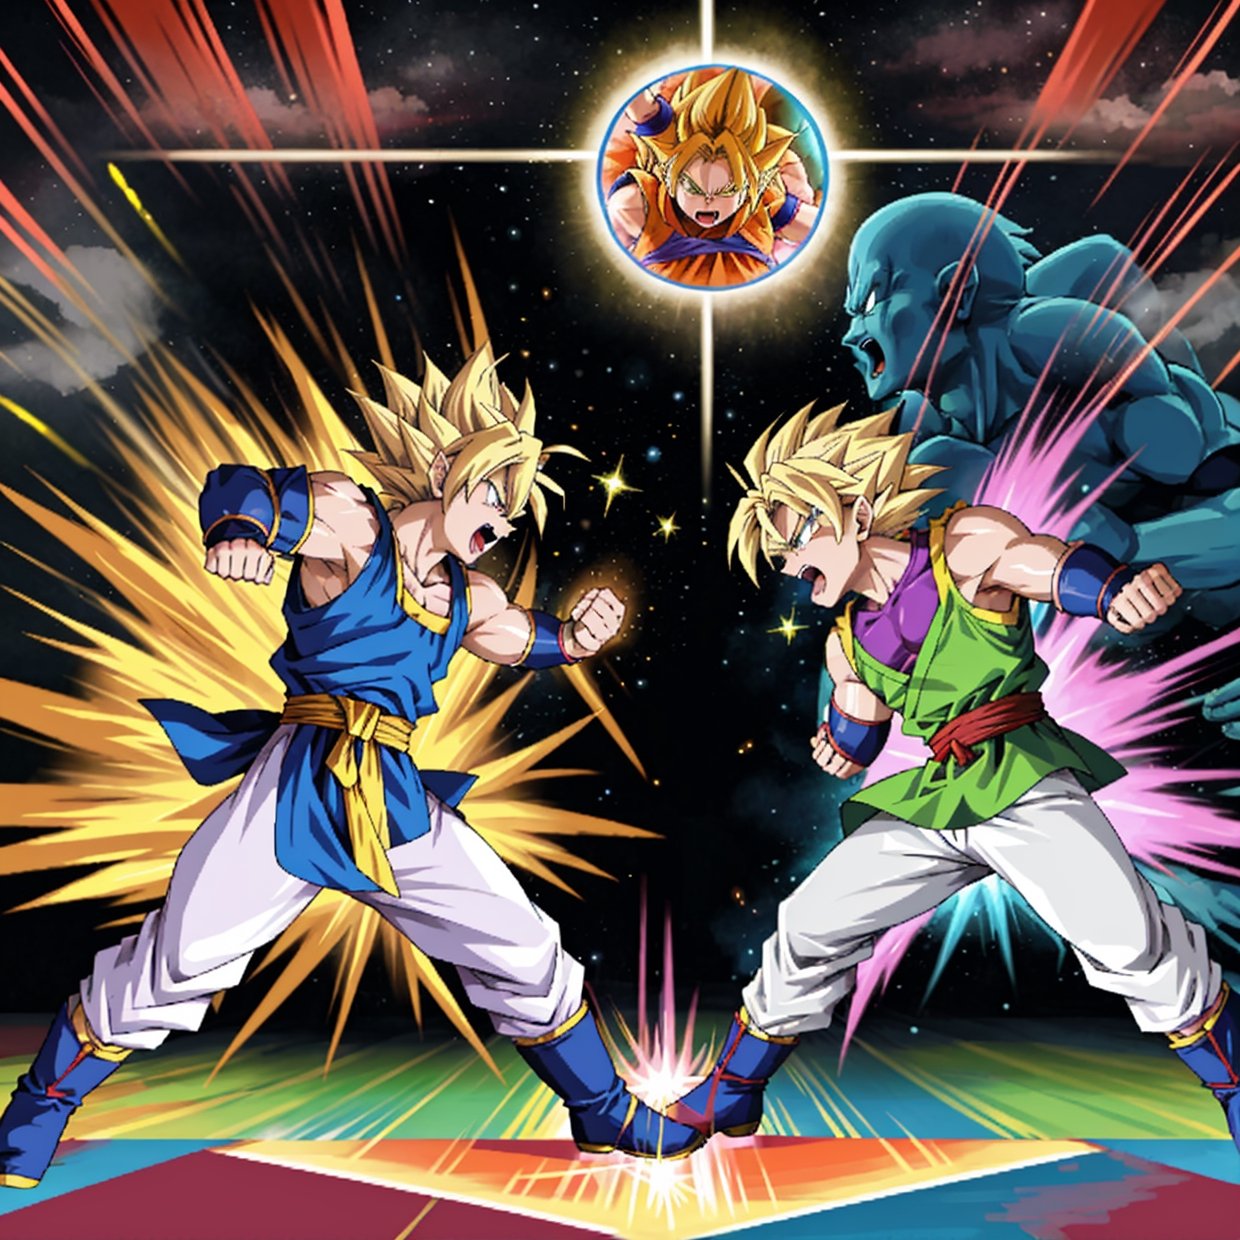 a powerful warrior, vibrant colors, epic battles, stunning energy blasts, intense emotions, dynamic action poses, martial arts mastery, iconic characters, spiky hair, glowing auras, planet-destroying fights, superhuman strength, otherworldly landscapes, Dragon Balls, wish-granting dragon, flying nimbus cloud, training in the hyperbolic time chamber, fusion dance, transforming into Super Saiyan, Goku, Vegeta, Gohan, Piccolo, Frieza, Cell, Majin Buu, Galactic Tournament, Kamehameha wave, Spirit Bomb, teleportation, powerful villains, legendary Super Saiyan, scream "It's over 9000!", iconic catchphrases, epic music, fast-paced animation, intricate fight choreography, dramatic power-ups, friendship and loyalty, never give up, saving the world, iconic screaming faces, anime art style, dynamic camera angles, vibrant and saturated colors, intense shading, explosive energy effects, anime-inspired costumes, epic clashes between good and evil, intense rivalries, iconic transformations, earth-shattering explosions.